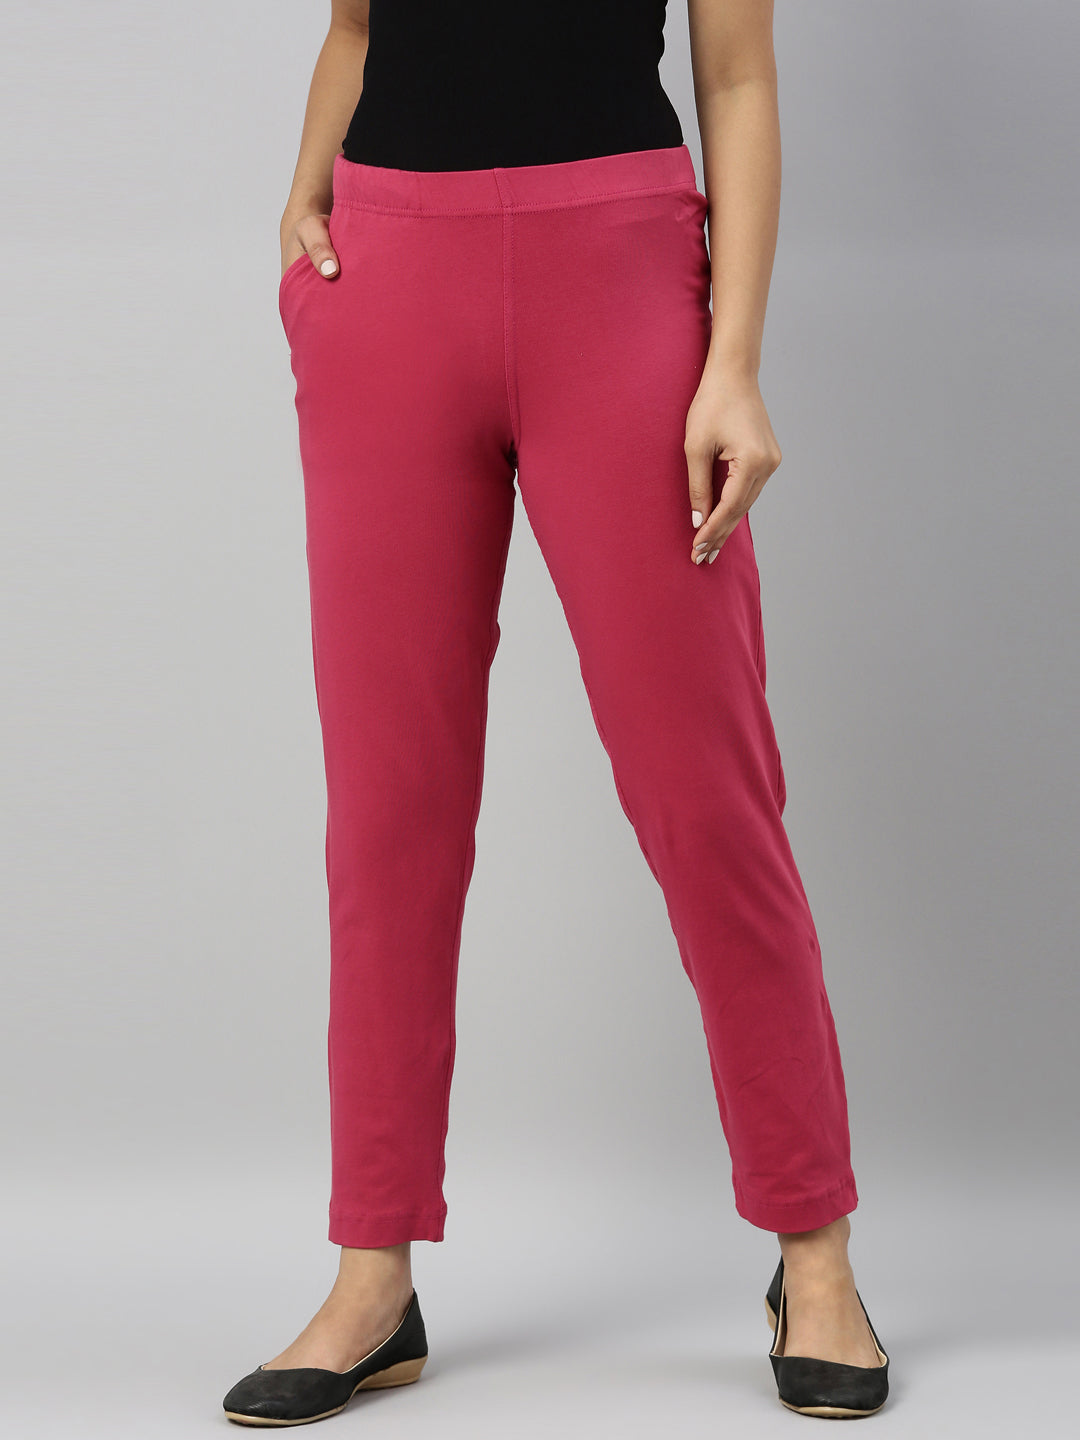 Go Colors Shiny Pant XL (Dark Pink) in Vijayawada at best price by Go Colors  - Justdial